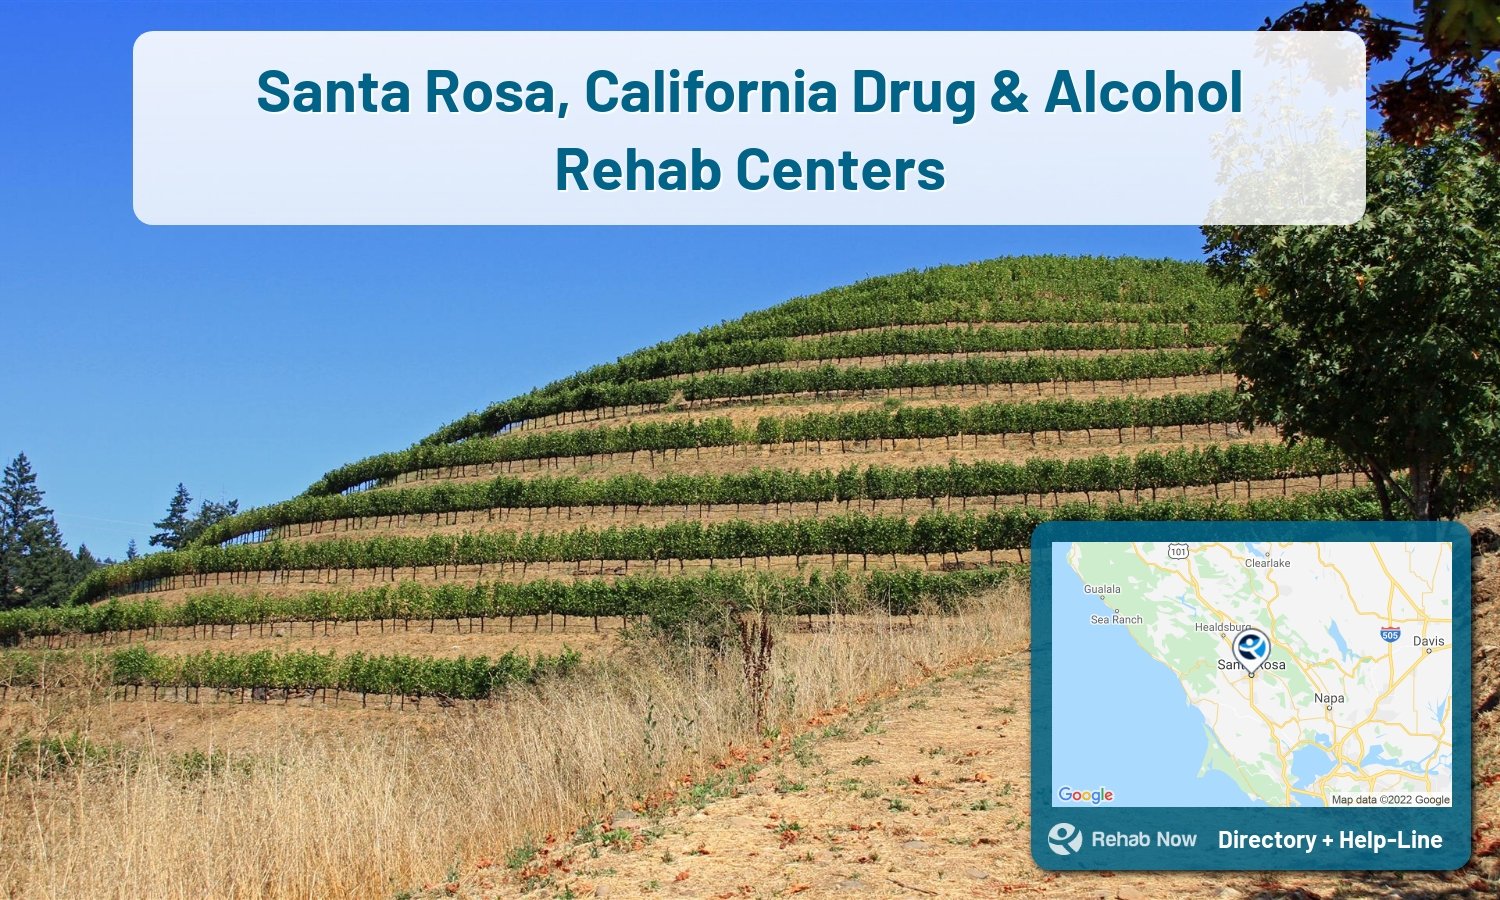 Santa Rosa, CA Treatment Centers. Find drug rehab in Santa Rosa, California, or detox and treatment programs. Get the right help now!